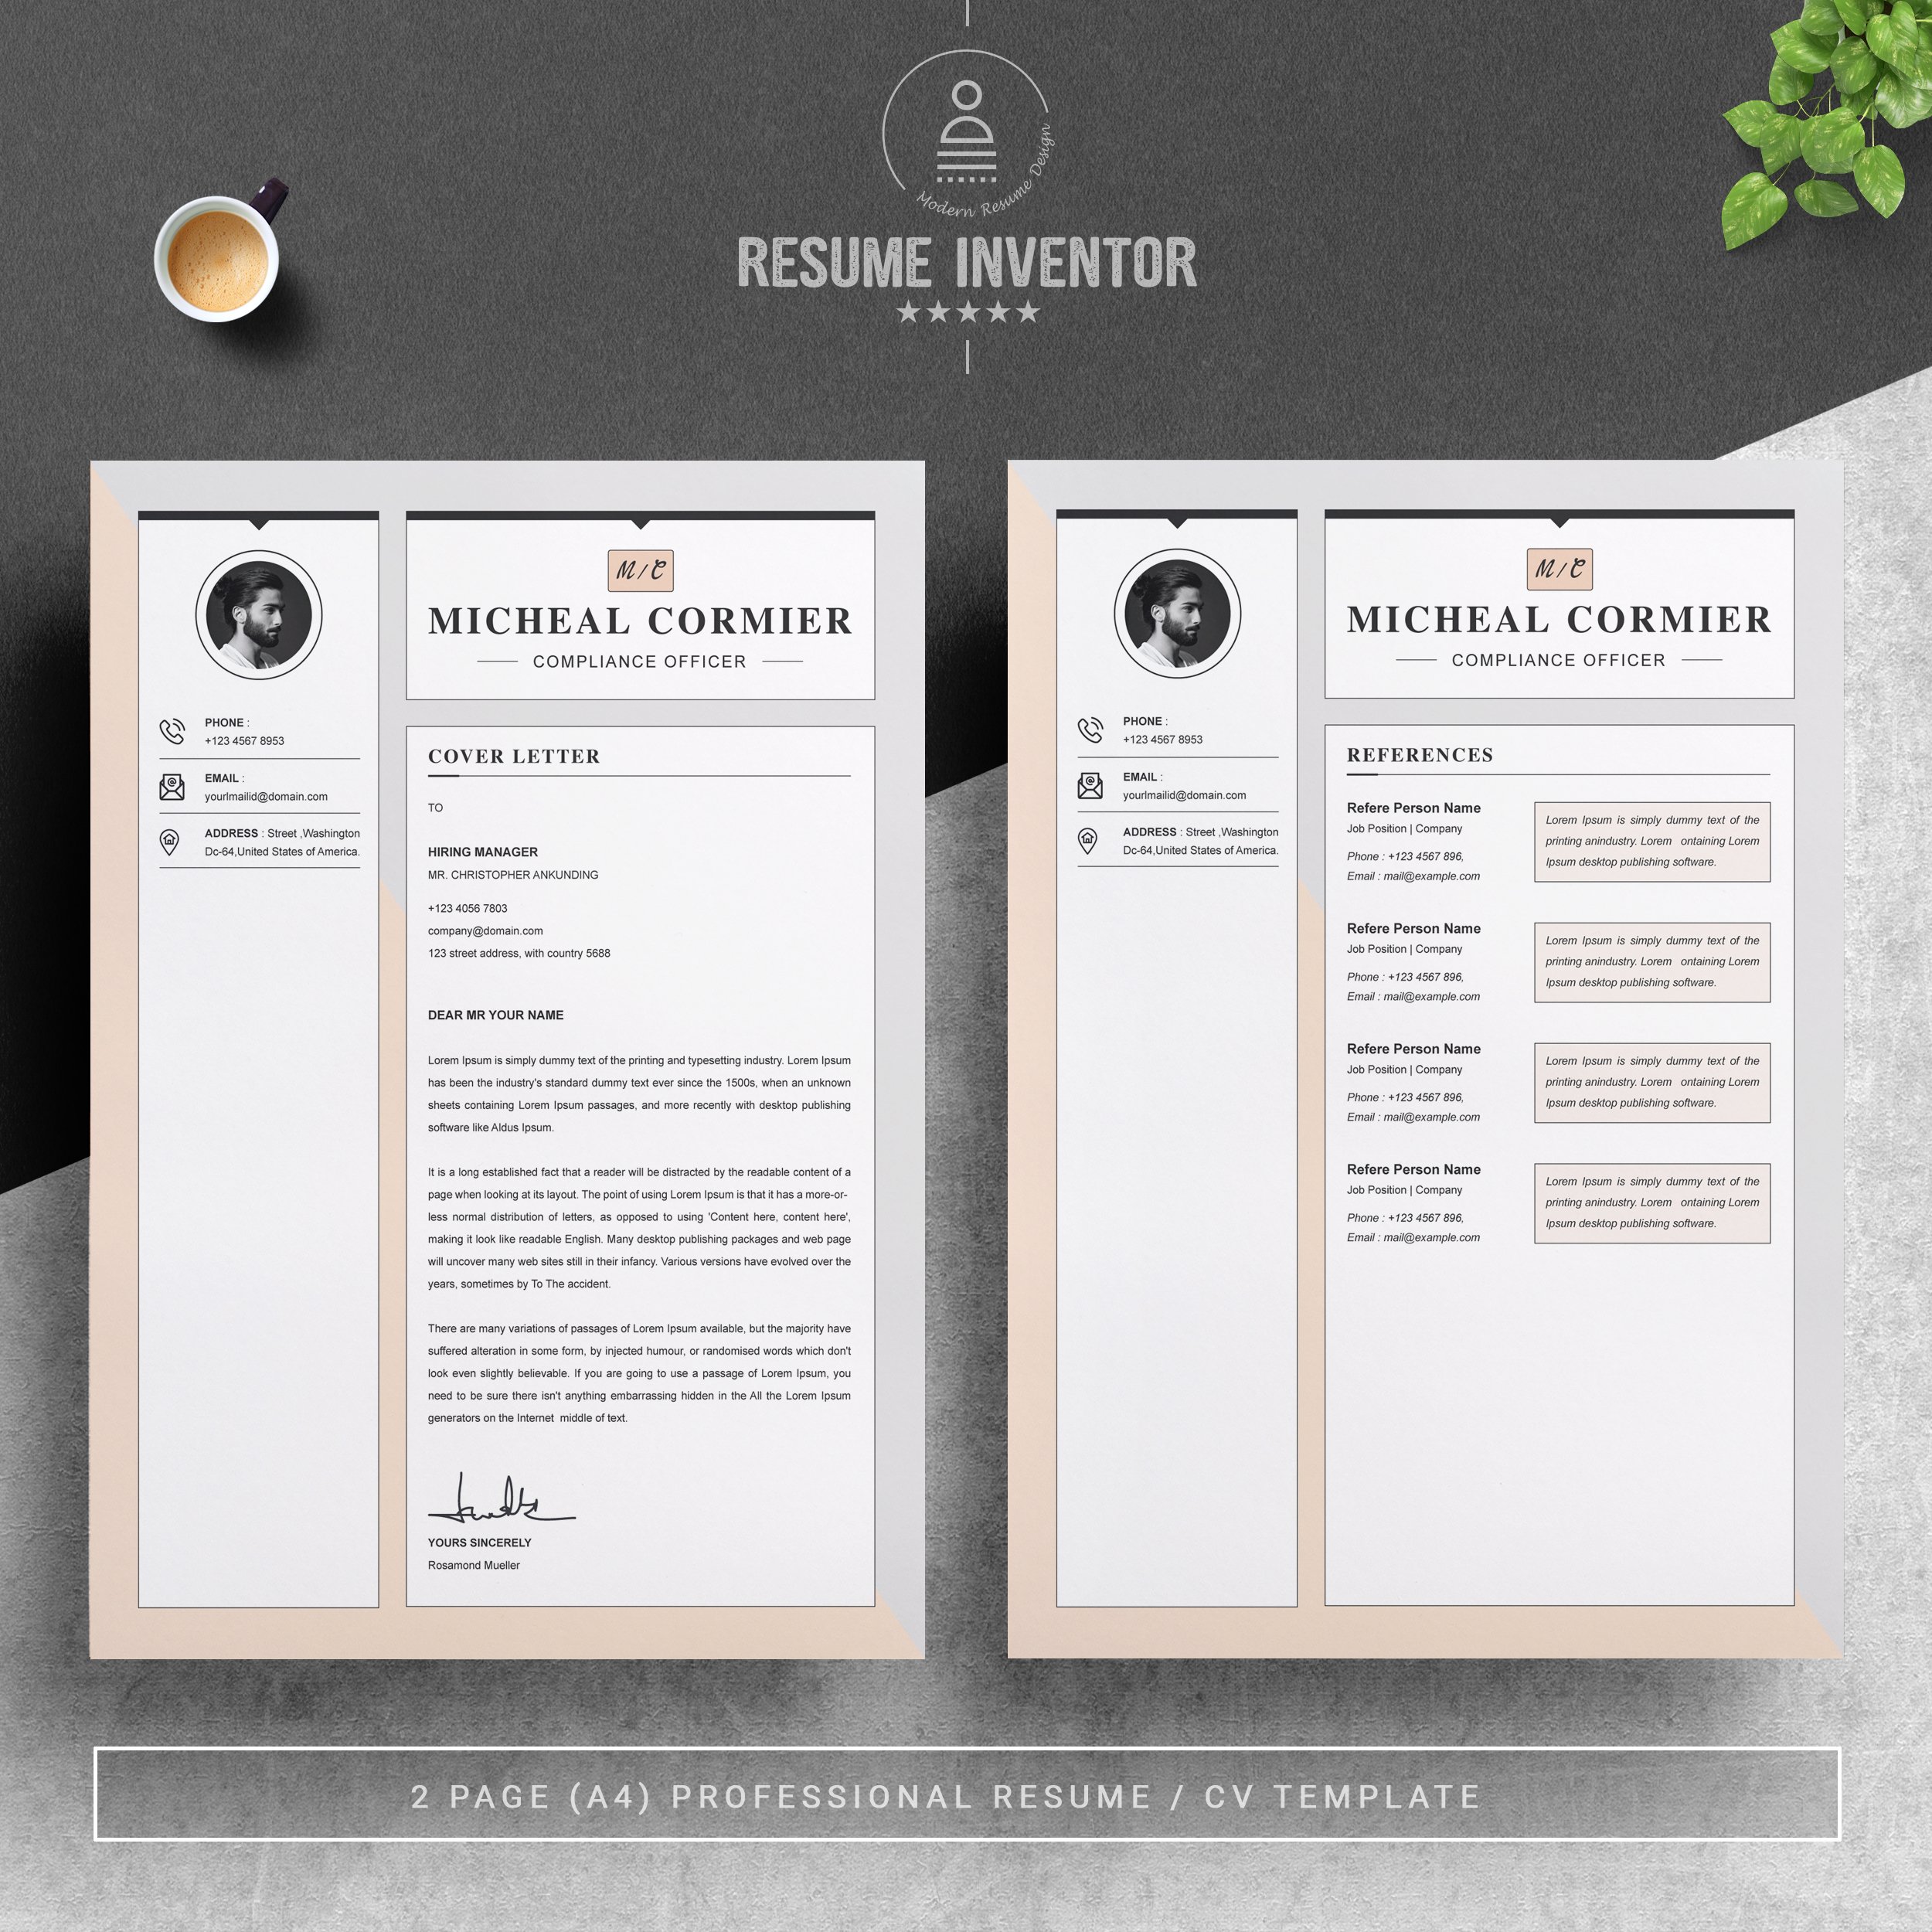 03 2 pages free resume design template 450